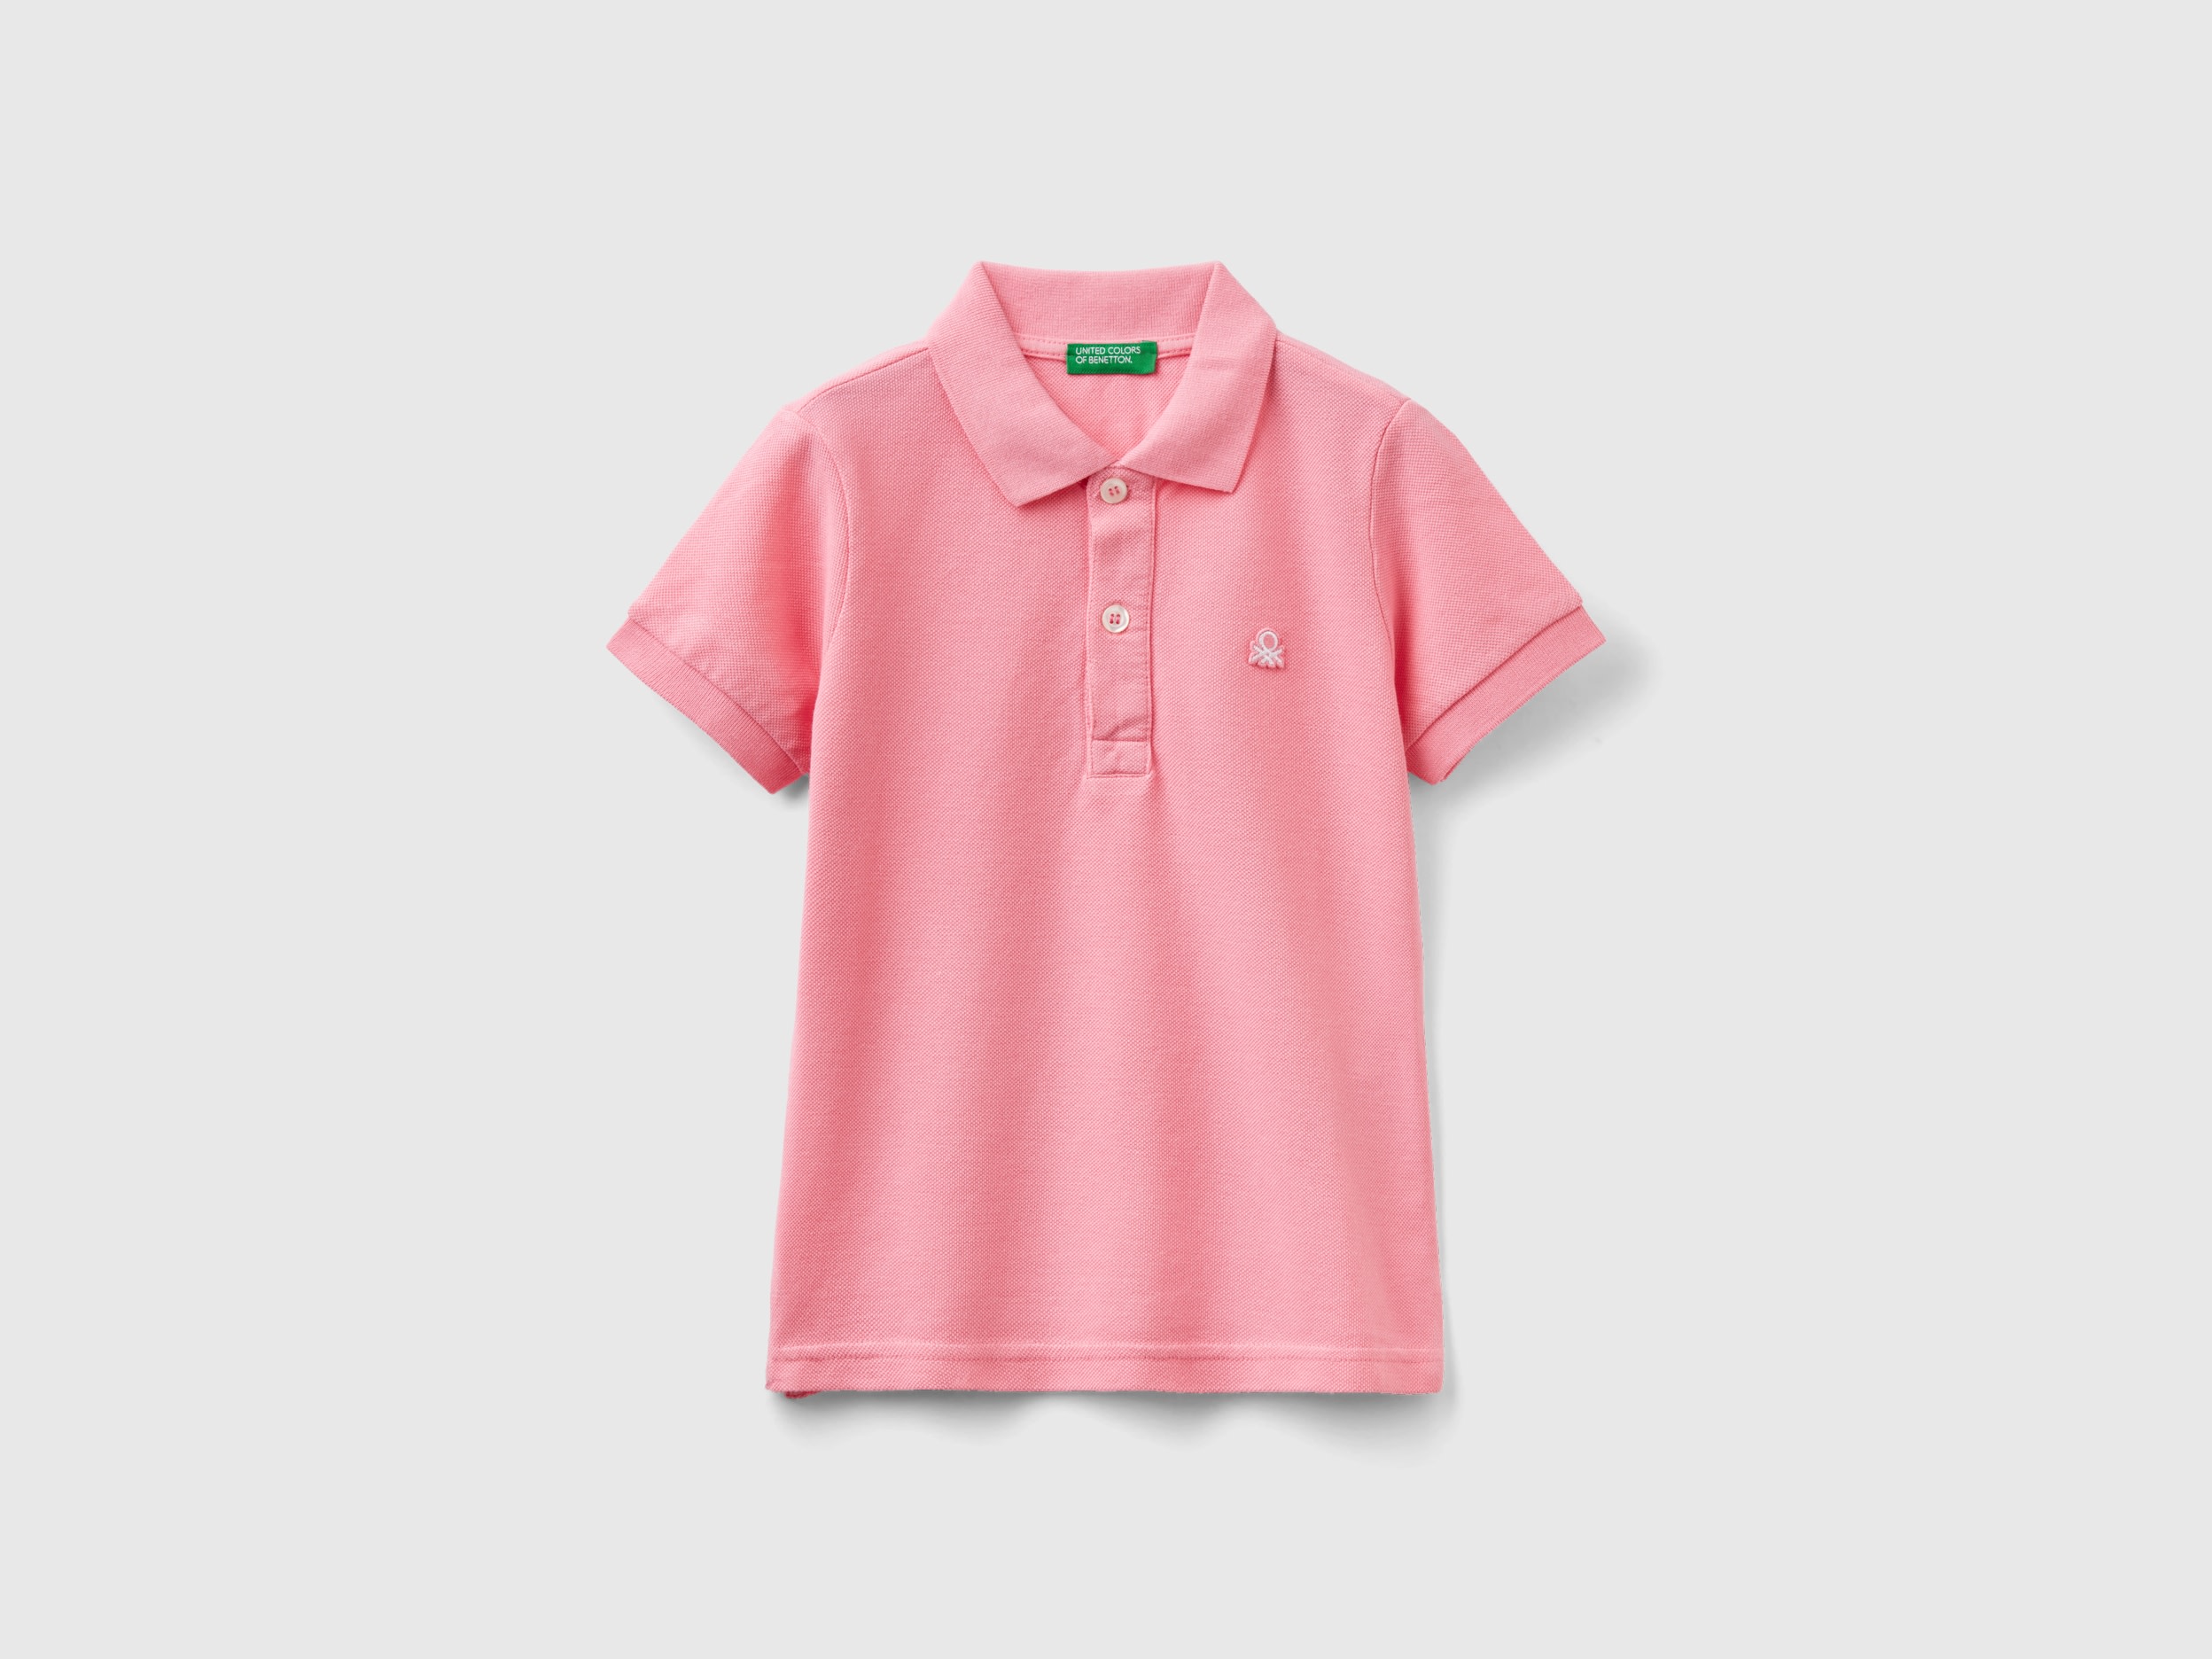 Benetton, Short Sleeve Polo In Organic Cotton, size 2-3, Pink, Kids